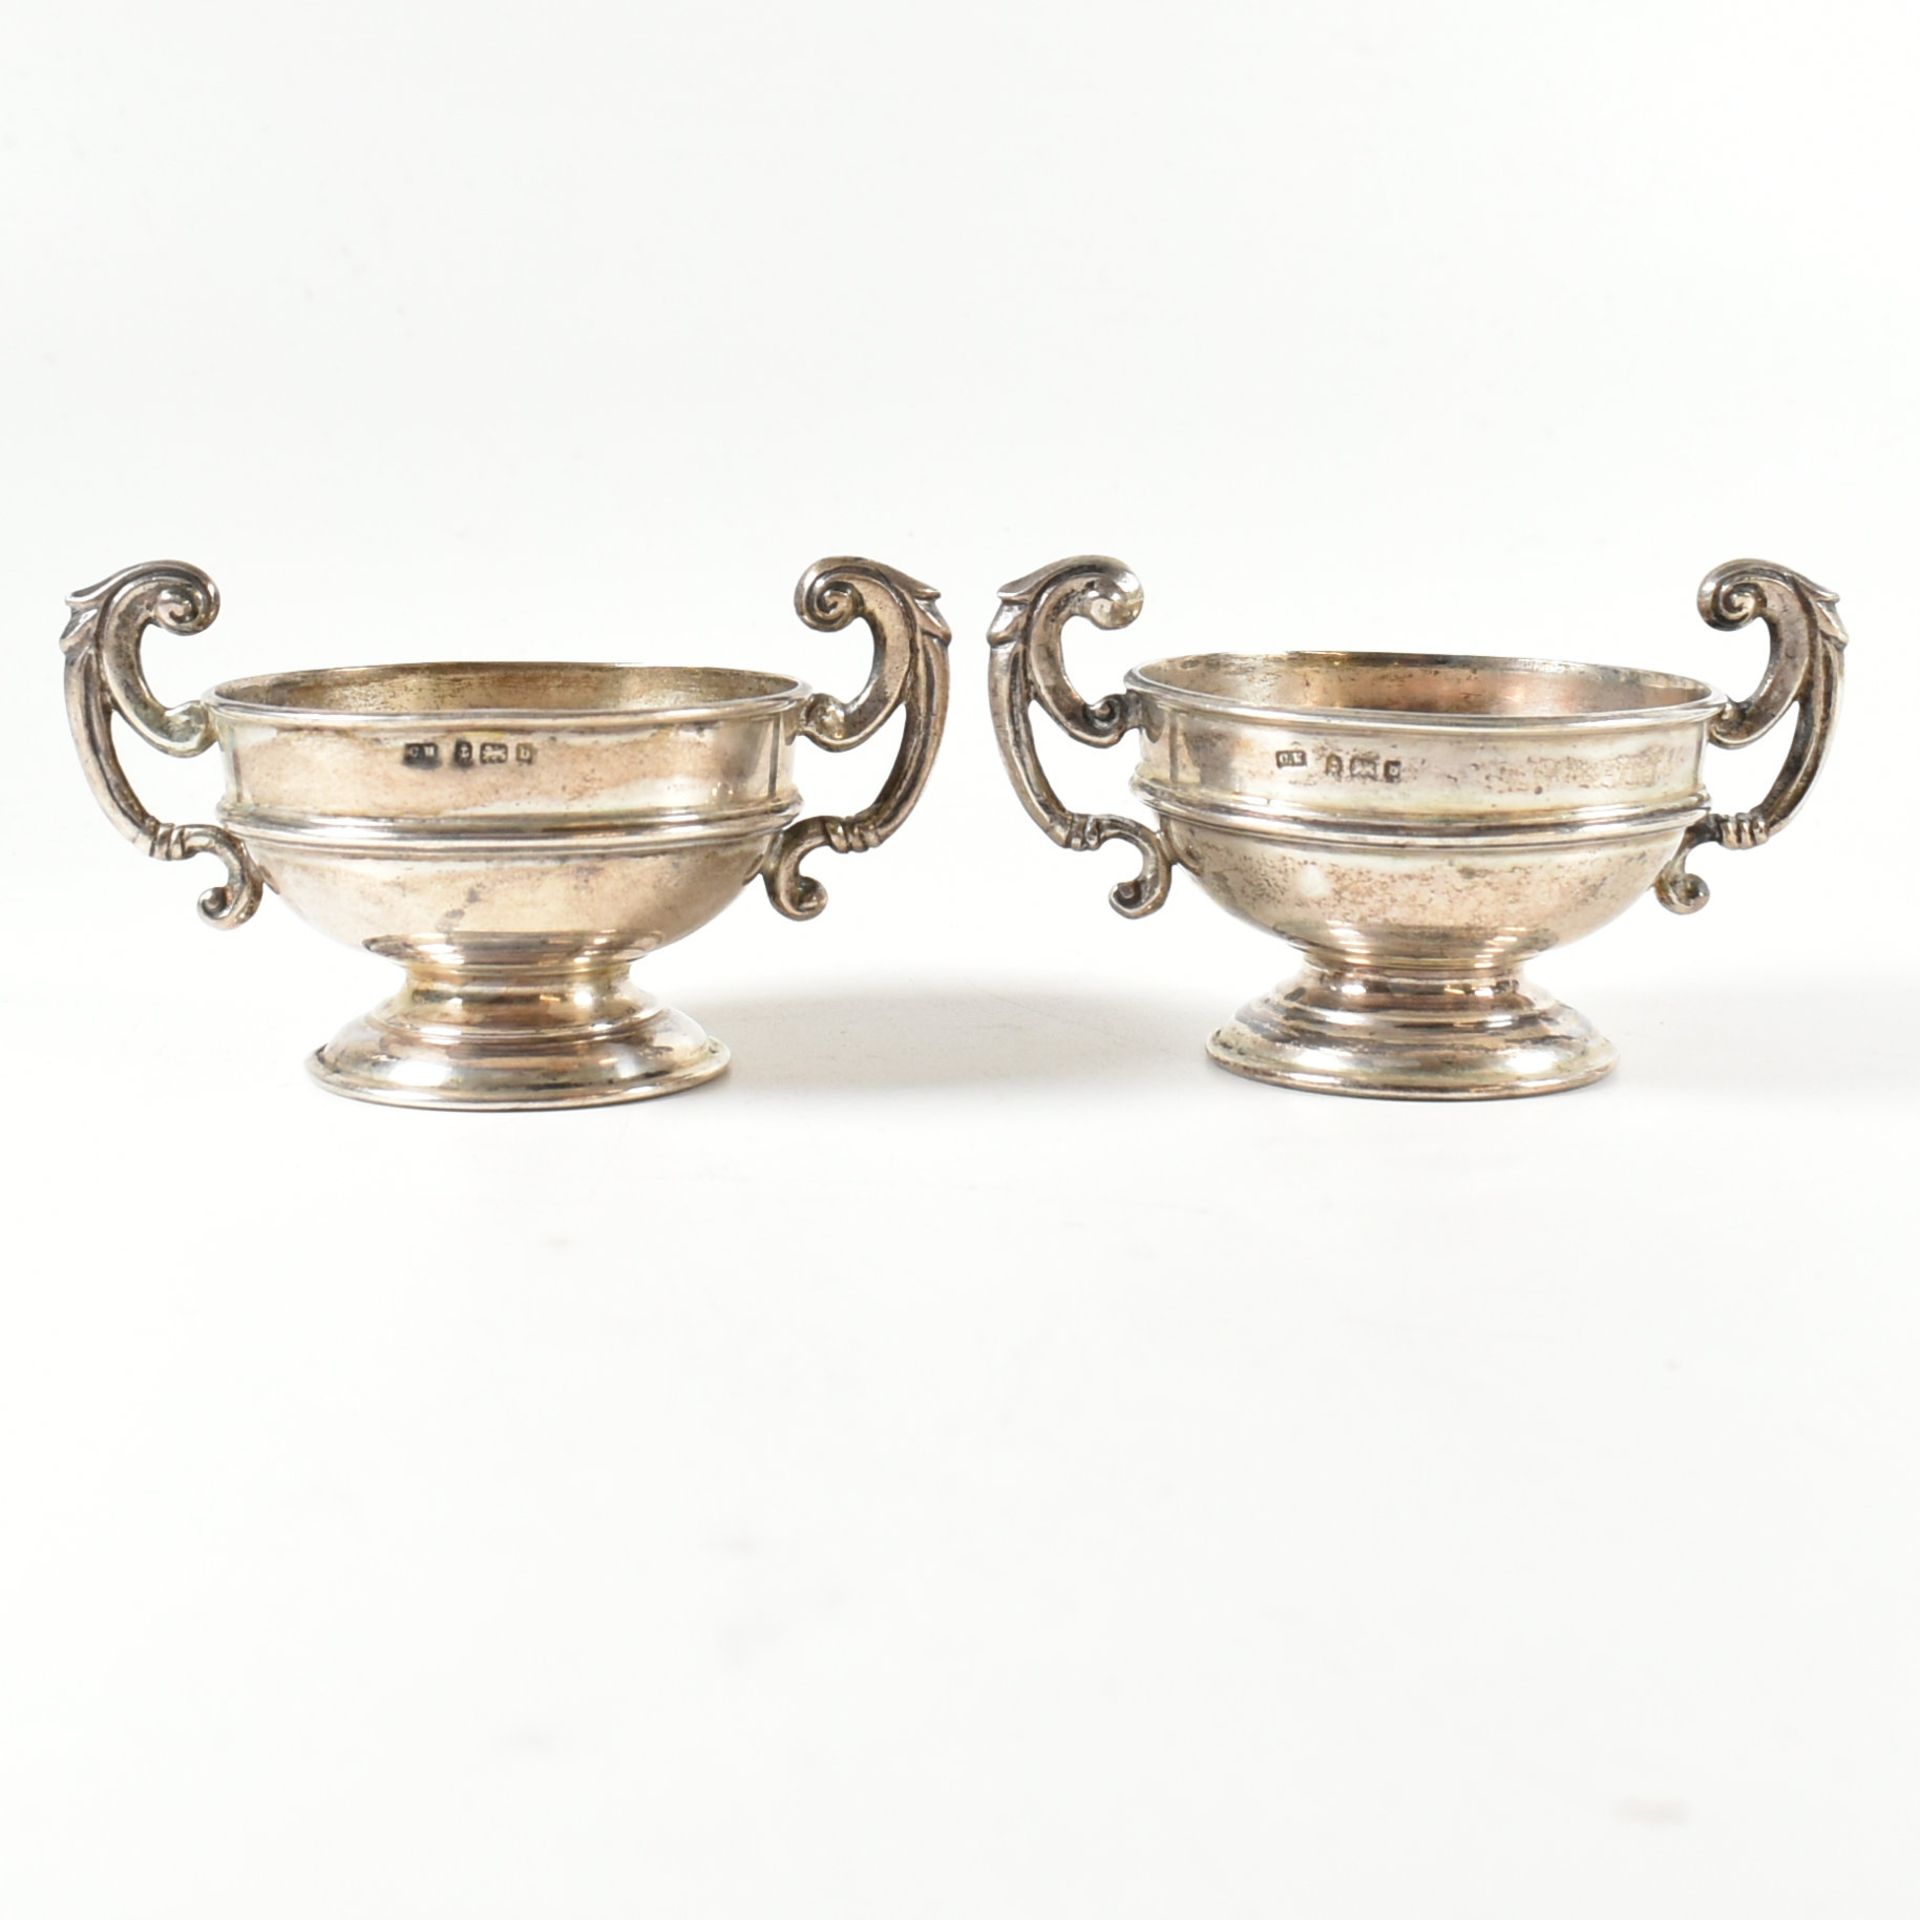 PAIR OF LATE VICTORIAN HALLMARKED SILVER SALTS CHARLES HORNER - Image 4 of 9